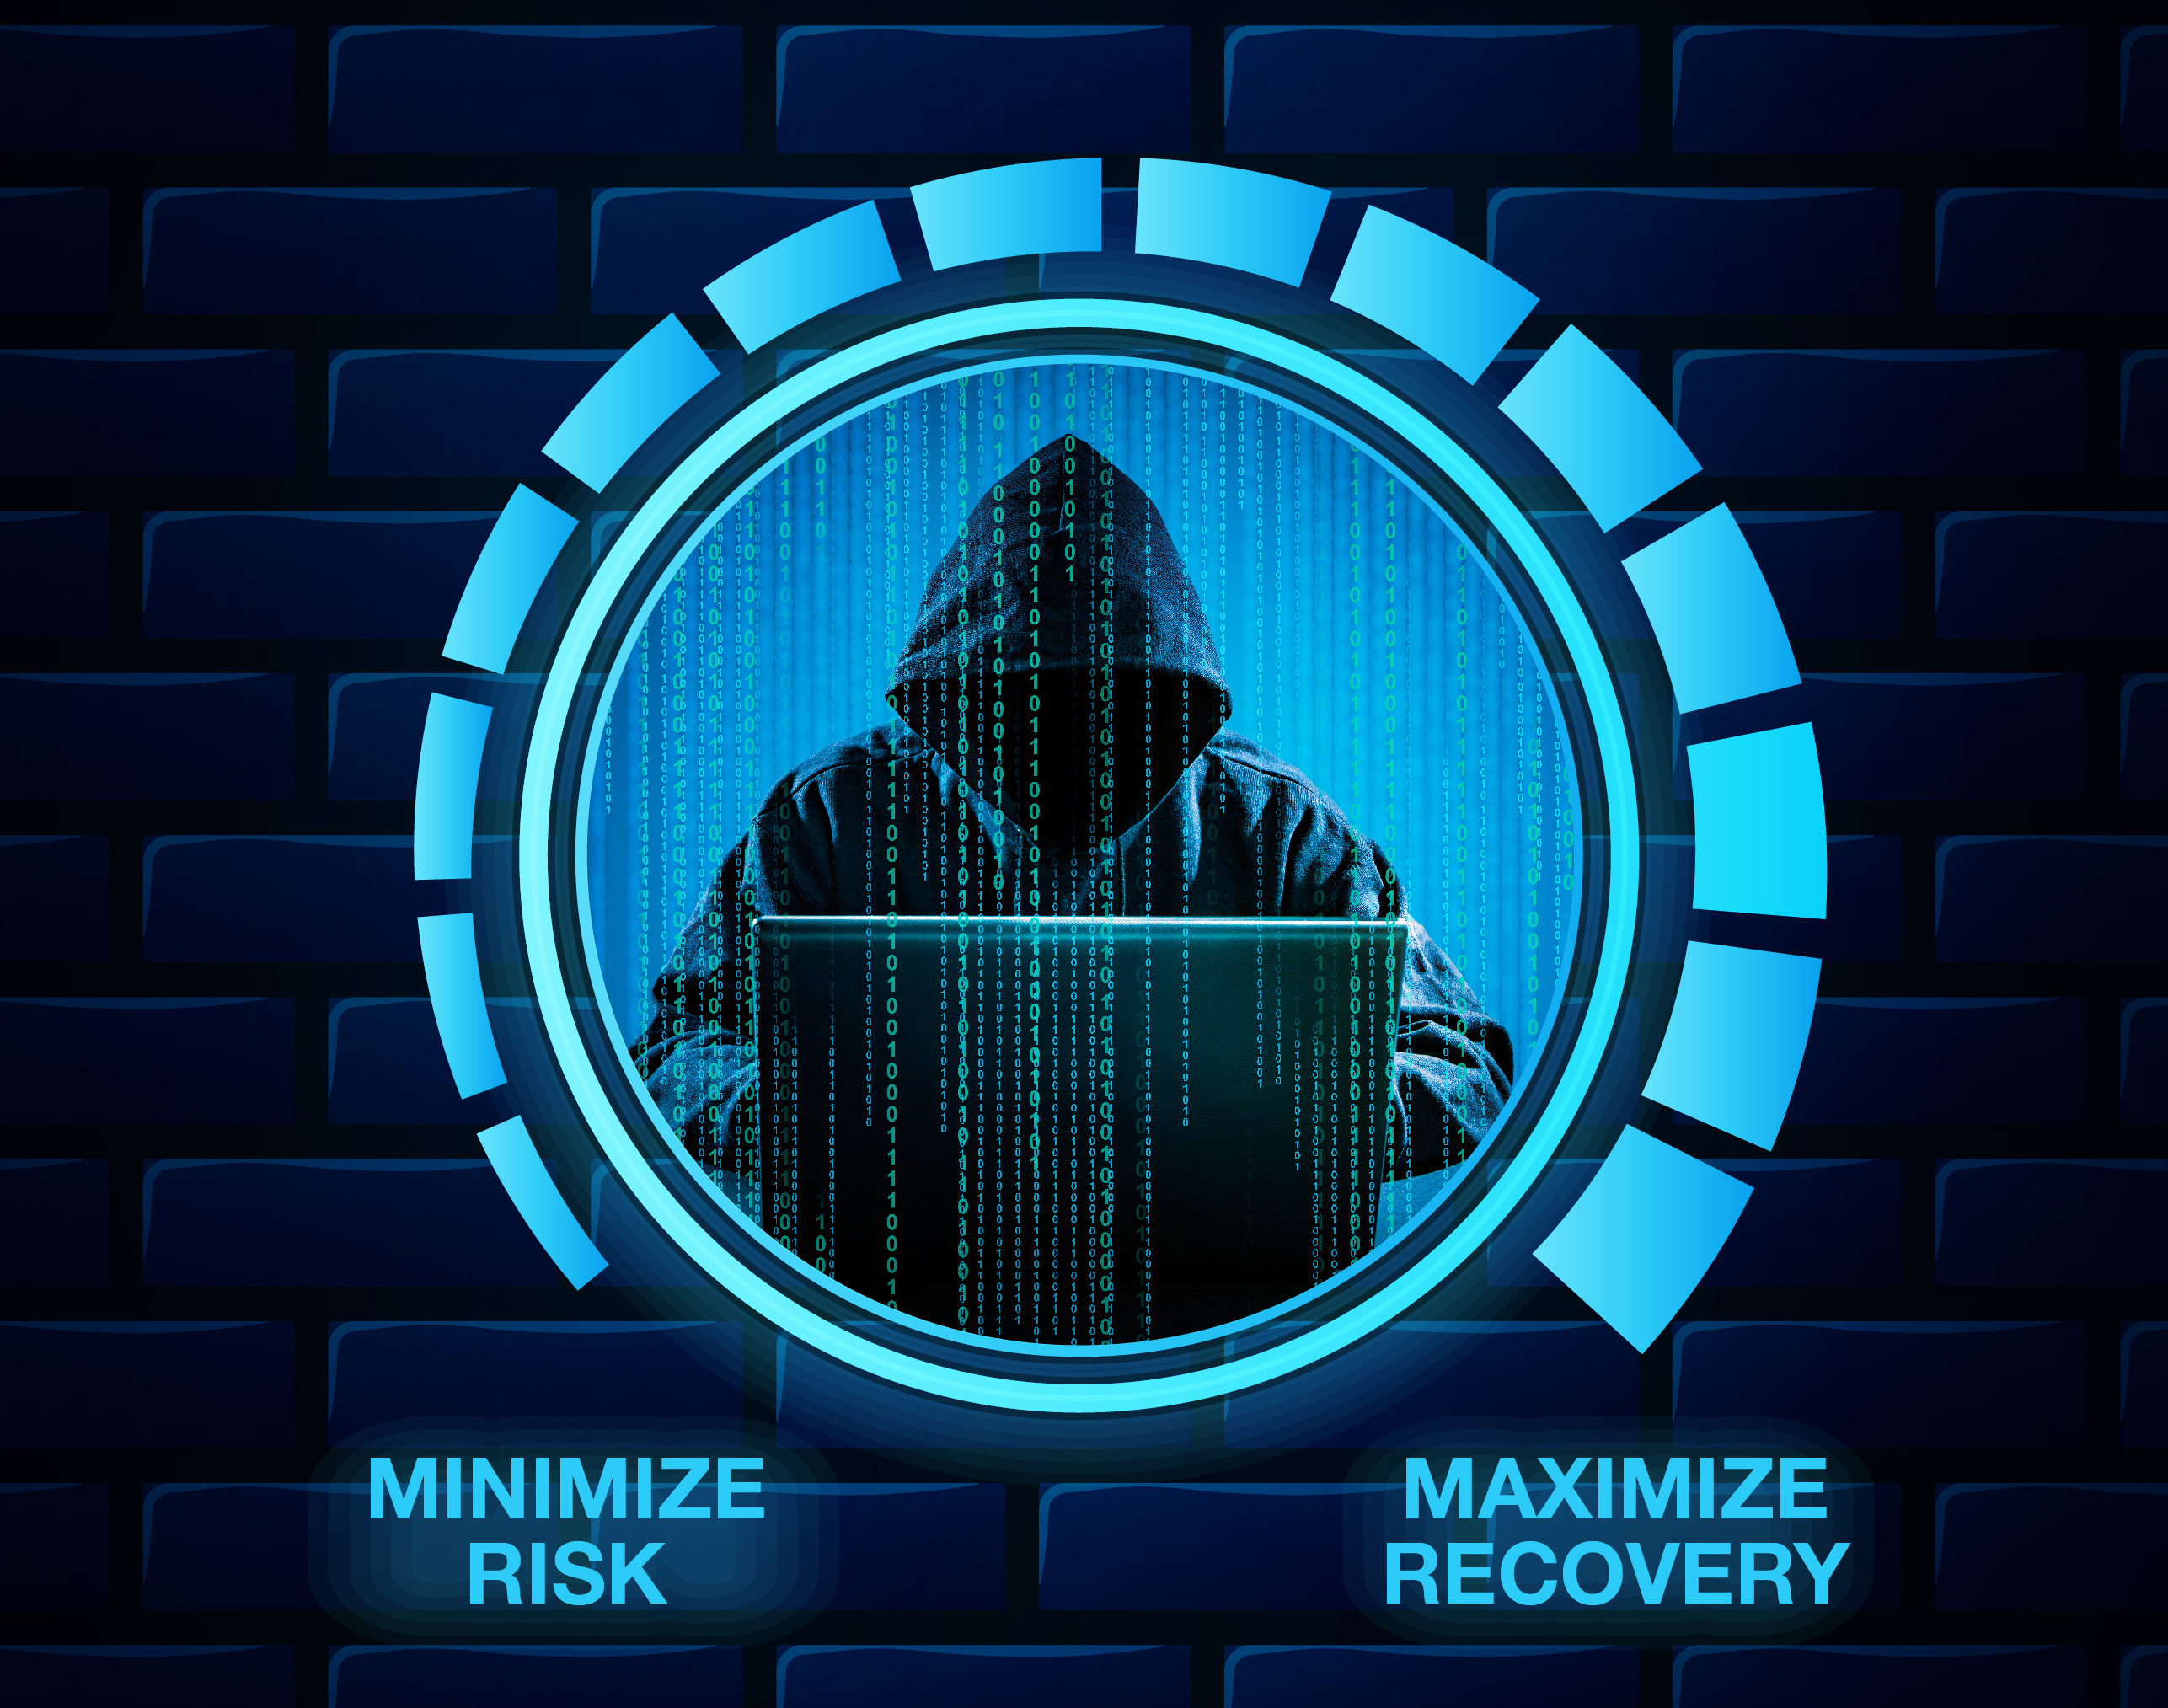 Cyber Insurance Claims cover image - person in hooded jacket behind a computer